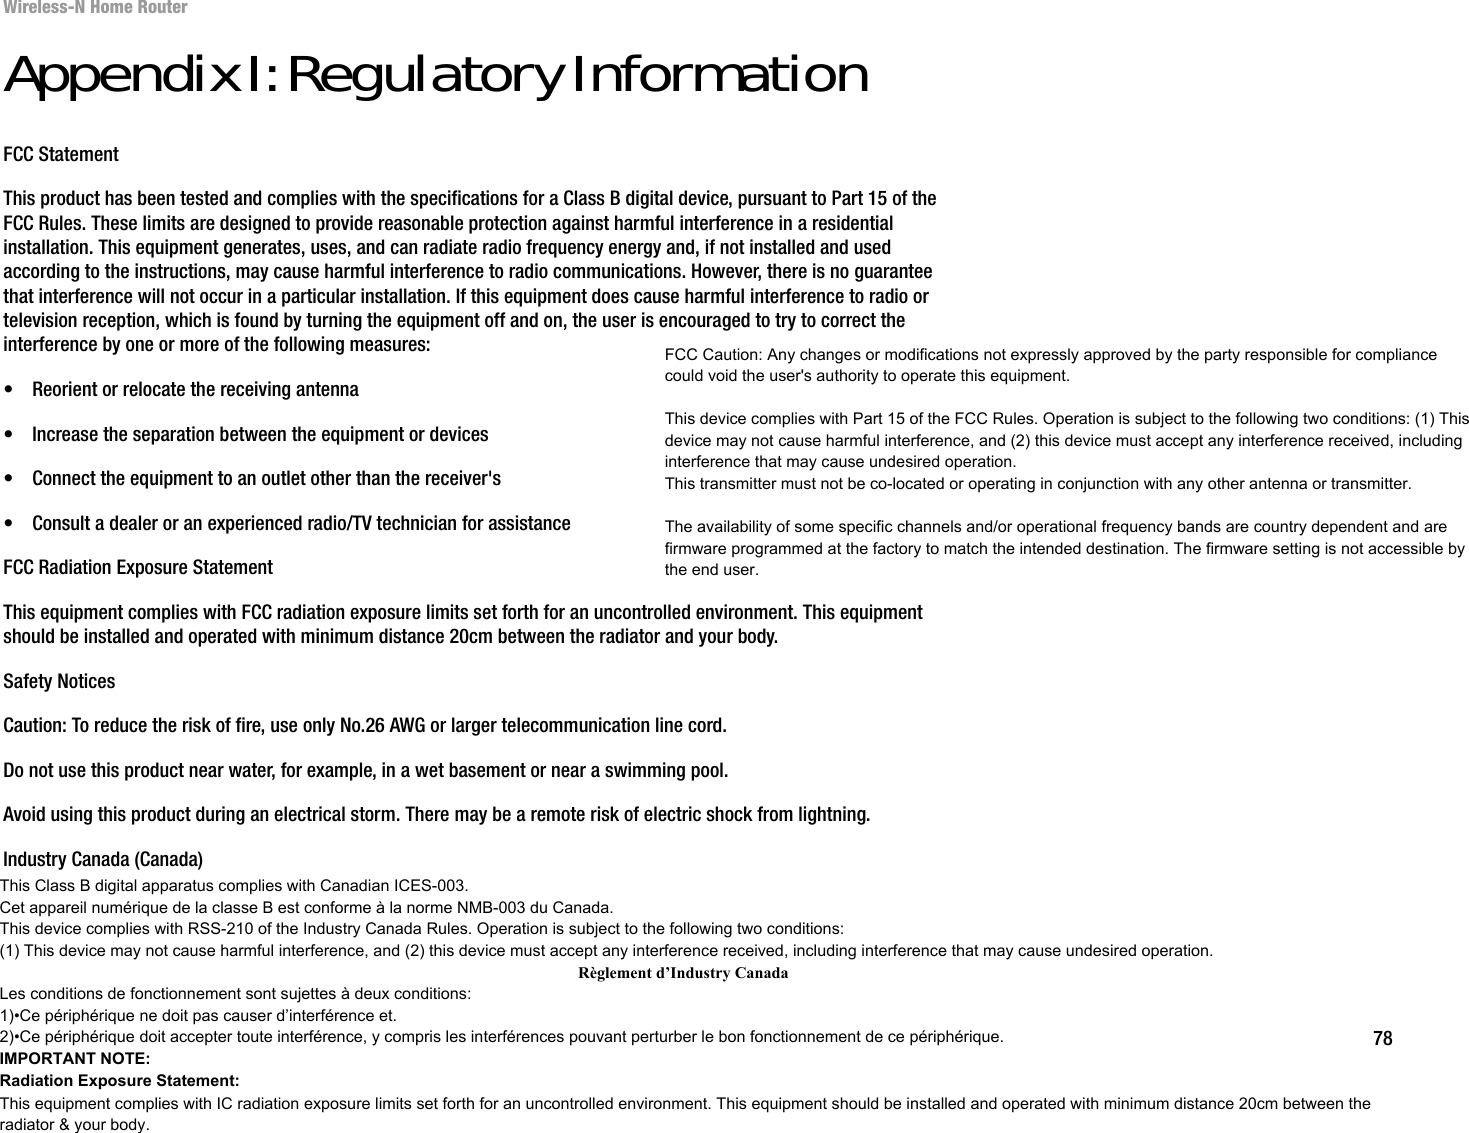 78Appendix I: Regulatory InformationWireless-N Home RouterAppendix I: Regulatory InformationFCC StatementThis product has been tested and complies with the specifications for a Class B digital device, pursuant to Part 15 of the FCC Rules. These limits are designed to provide reasonable protection against harmful interference in a residential installation. This equipment generates, uses, and can radiate radio frequency energy and, if not installed and used according to the instructions, may cause harmful interference to radio communications. However, there is no guarantee that interference will not occur in a particular installation. If this equipment does cause harmful interference to radio or television reception, which is found by turning the equipment off and on, the user is encouraged to try to correct the interference by one or more of the following measures:• Reorient or relocate the receiving antenna• Increase the separation between the equipment or devices• Connect the equipment to an outlet other than the receiver&apos;s• Consult a dealer or an experienced radio/TV technician for assistanceFCC Radiation Exposure StatementThis equipment complies with FCC radiation exposure limits set forth for an uncontrolled environment. This equipment should be installed and operated with minimum distance 20cm between the radiator and your body.Safety NoticesCaution: To reduce the risk of fire, use only No.26 AWG or larger telecommunication line cord.Do not use this product near water, for example, in a wet basement or near a swimming pool.Avoid using this product during an electrical storm. There may be a remote risk of electric shock from lightning.Industry Canada (Canada)This device complies with Industry Canada ICES-003 and RSS210 rules.Cet appareil est conforme aux normes NMB003 et RSS210 d&apos;Industrie Canada.FCC Caution: Any changes or modifications not expressly approved by the party responsible for compliance could void the user&apos;s authority to operate this equipment.This device complies with Part 15 of the FCC Rules. Operation is subject to the following two conditions: (1) Thisdevice may not cause harmful interference, and (2) this device must accept any interference received, includinginterference that may cause undesired operation.This transmitter must not be co-located or operating in conjunction with any other antenna or transmitter.The availability of some specific channels and/or operational frequency bands are country dependent and are firmware programmed at the factory to match the intended destination. The firmware setting is not accessible bythe end user.This Class B digital apparatus complies with Canadian ICES-003. Cet appareil numérique de la classe B est conforme à la norme NMB-003 du Canada.This device complies with RSS-210 of the Industry Canada Rules. Operation is subject to the following two conditions: (1) This device may not cause harmful interference, and (2) this device must accept any interference received, including interference that may cause undesired operation.Règlement d’Industry Canada Les conditions de fonctionnement sont sujettes à deux conditions:1)•Ce périphérique ne doit pas causer d’interférence et.2)•Ce périphérique doit accepter toute interférence, y compris les interférences pouvant perturber le bon fonctionnement de ce périphérique.IMPORTANT NOTE:Radiation Exposure Statement:This equipment complies with IC radiation exposure limits set forth for an uncontrolled environment. This equipment should be installed and operated with minimum distance 20cm between the radiator &amp; your body.